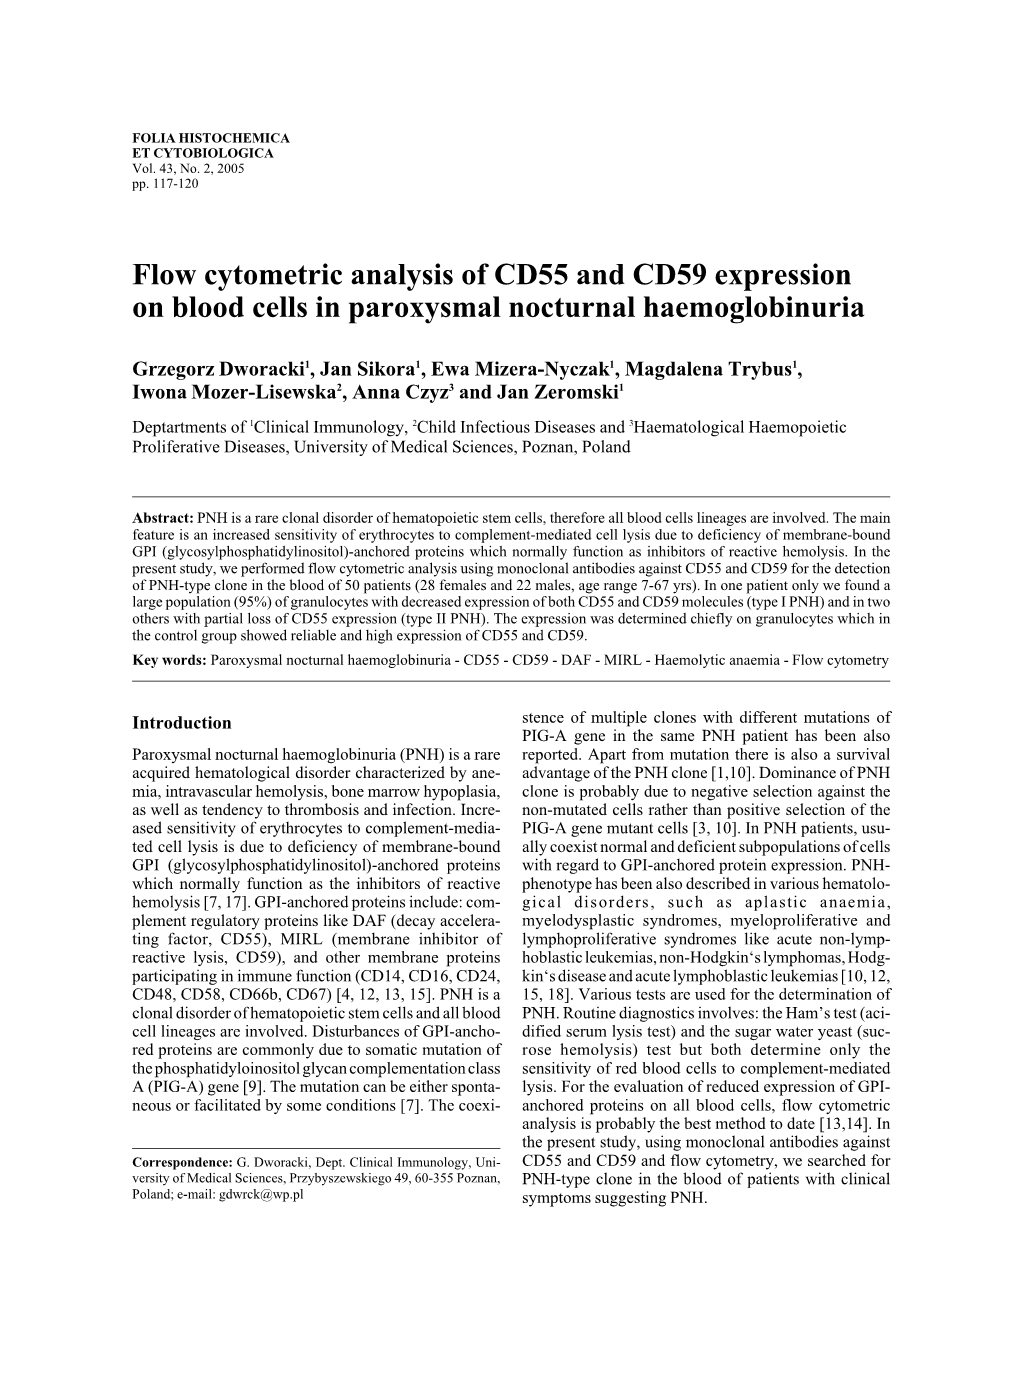 Flow Cytometric Analysis of CD55 and CD59 Expression on Blood Cells in Paroxysmal Nocturnal Haemoglobinuria